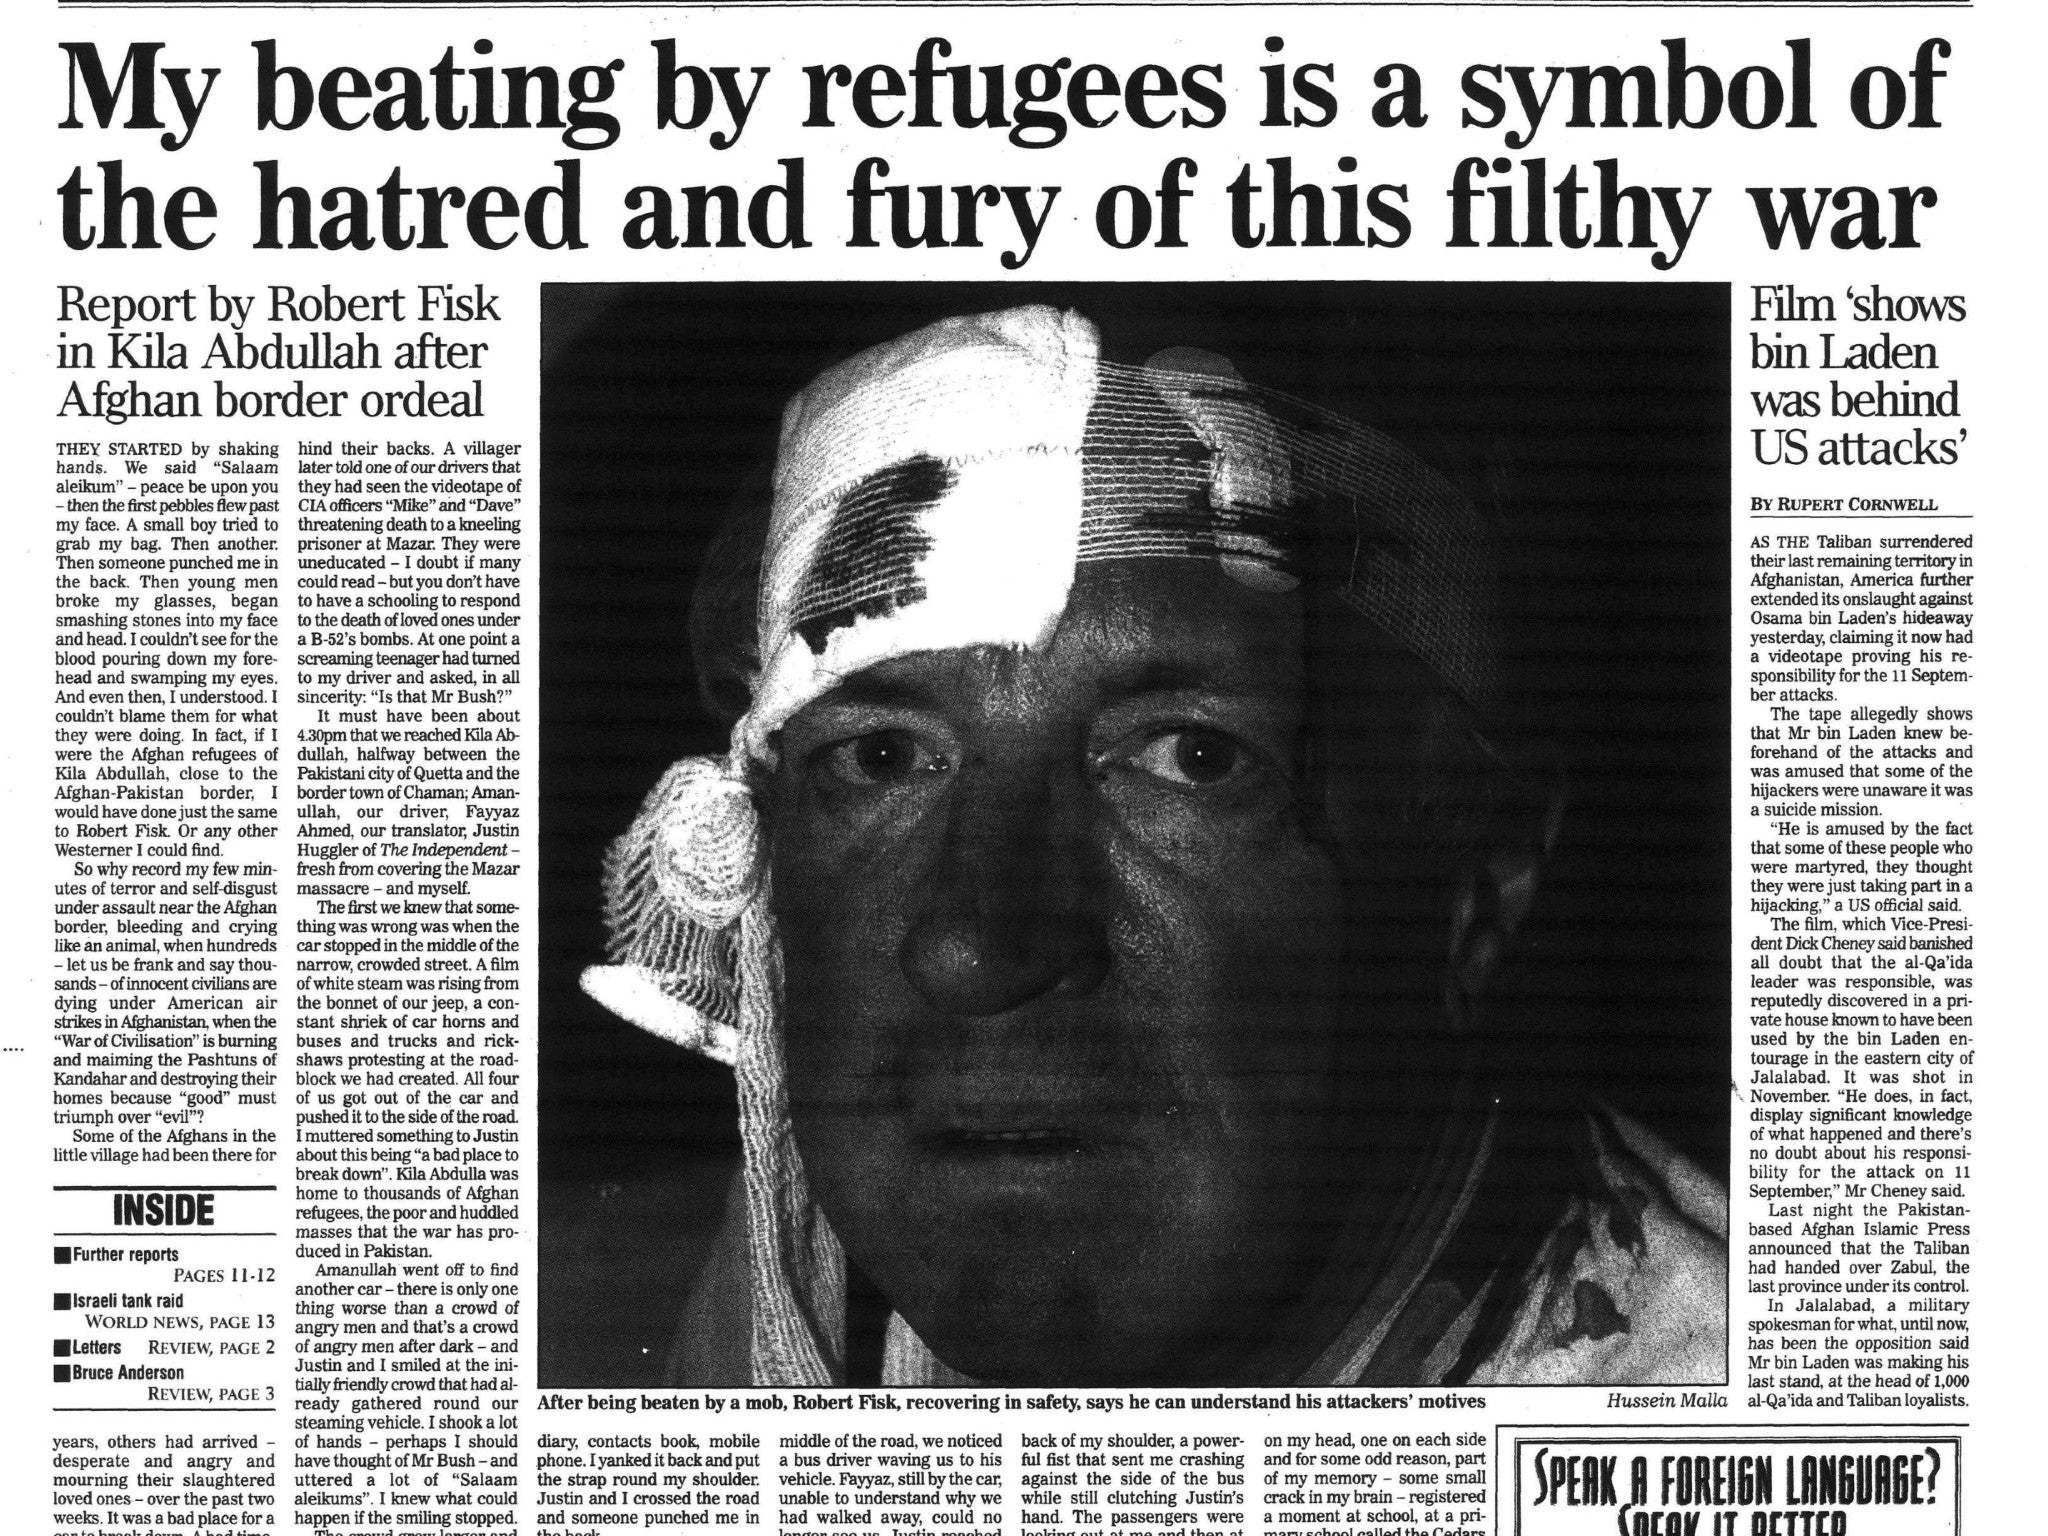 The Independent’s front page on 10 December 2001